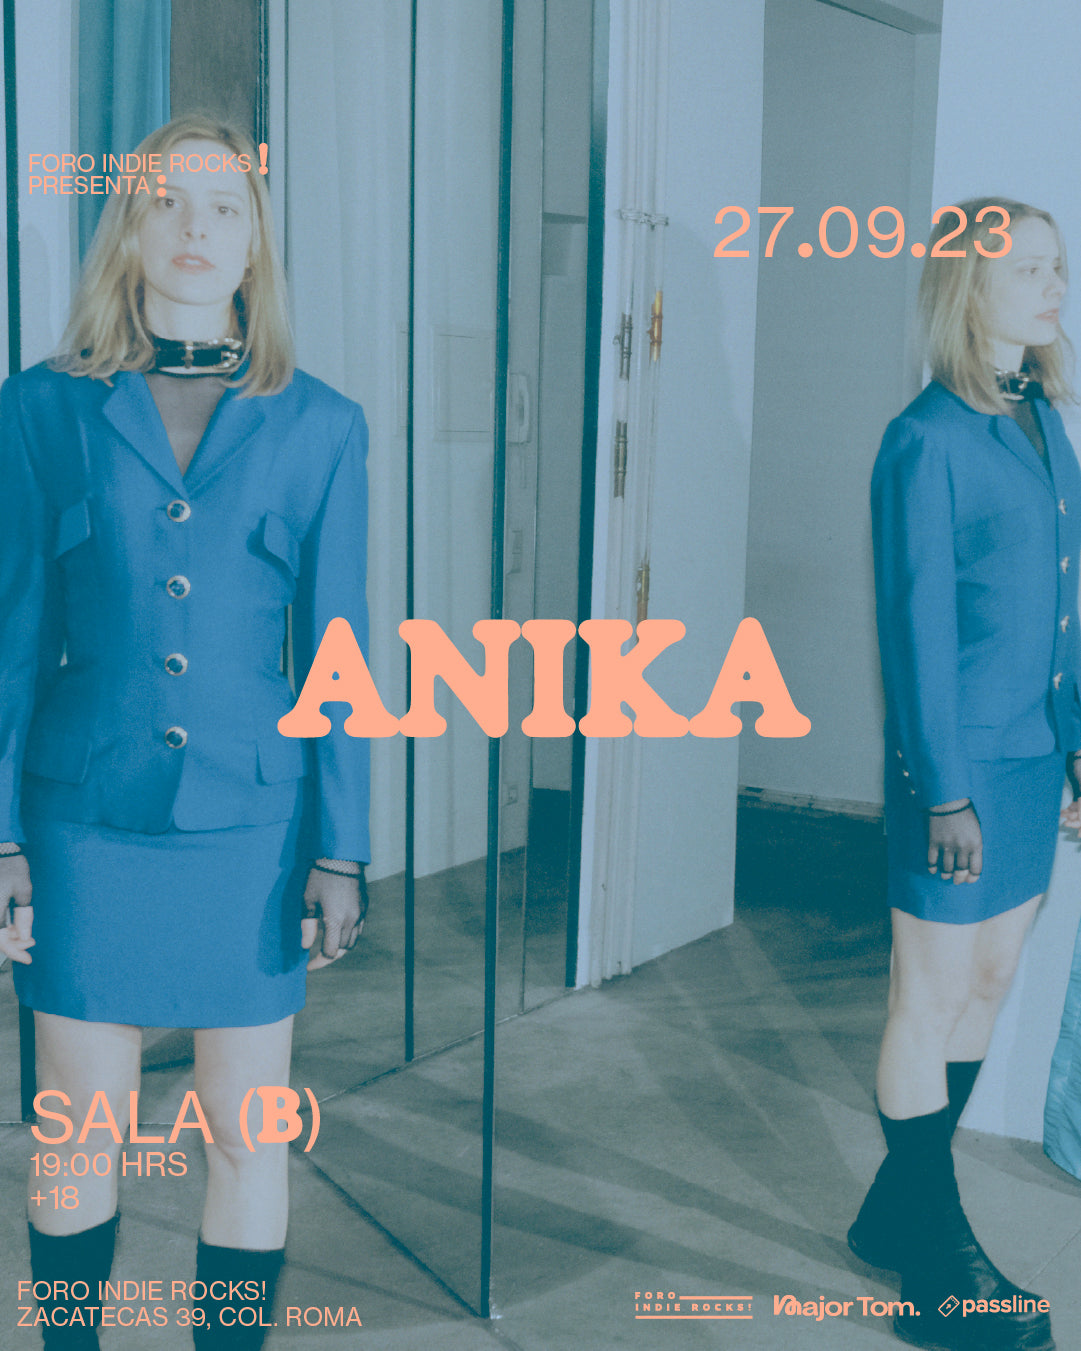 Anika returns to Mexico City this September - Live @ FORO INDIE Rocks!